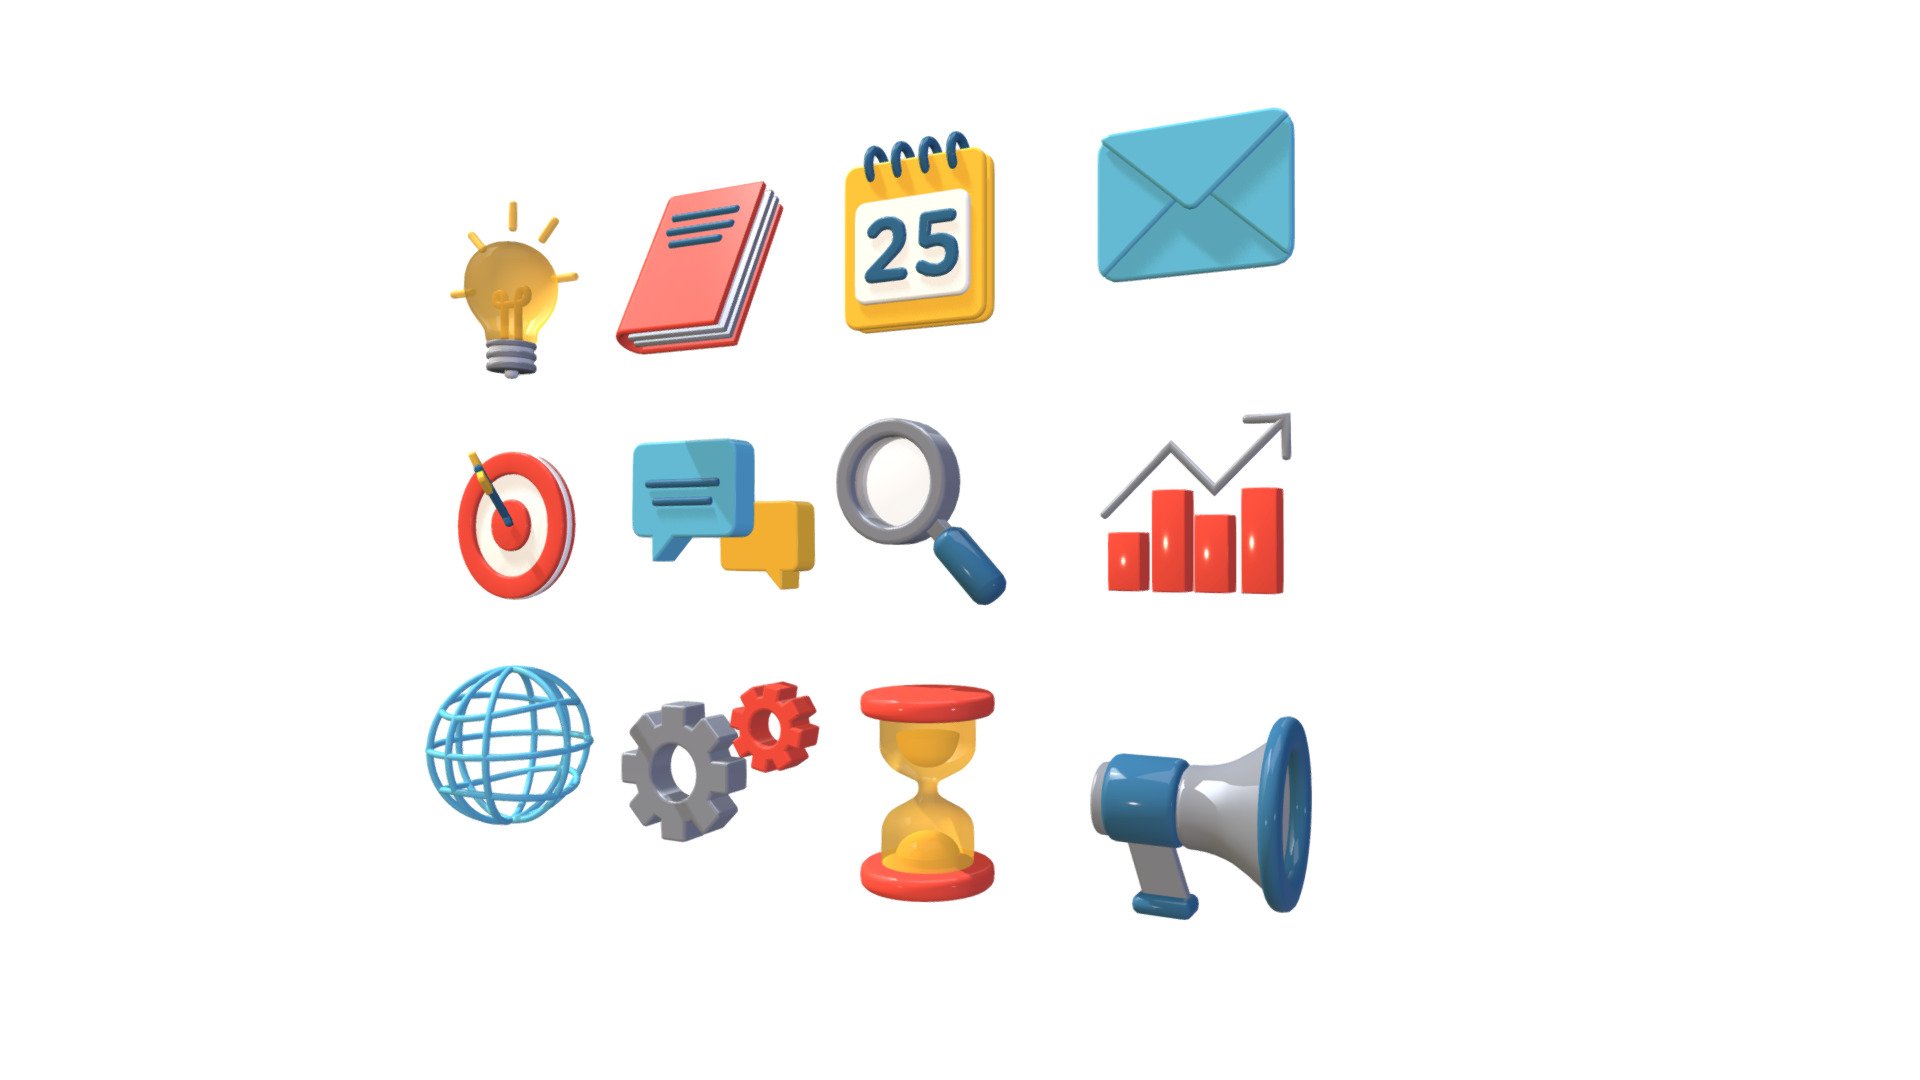 check out my 3d model icons base on the 2d vector icons 3d model into 3d assets. dont forget to check out the asset pack and make to download this pack. hope you like it.

Here's the sample of the applied assets
 - Bussiness Icon Set - Buy Royalty Free 3D model by Ino Esteves (@imesteves) 3d model